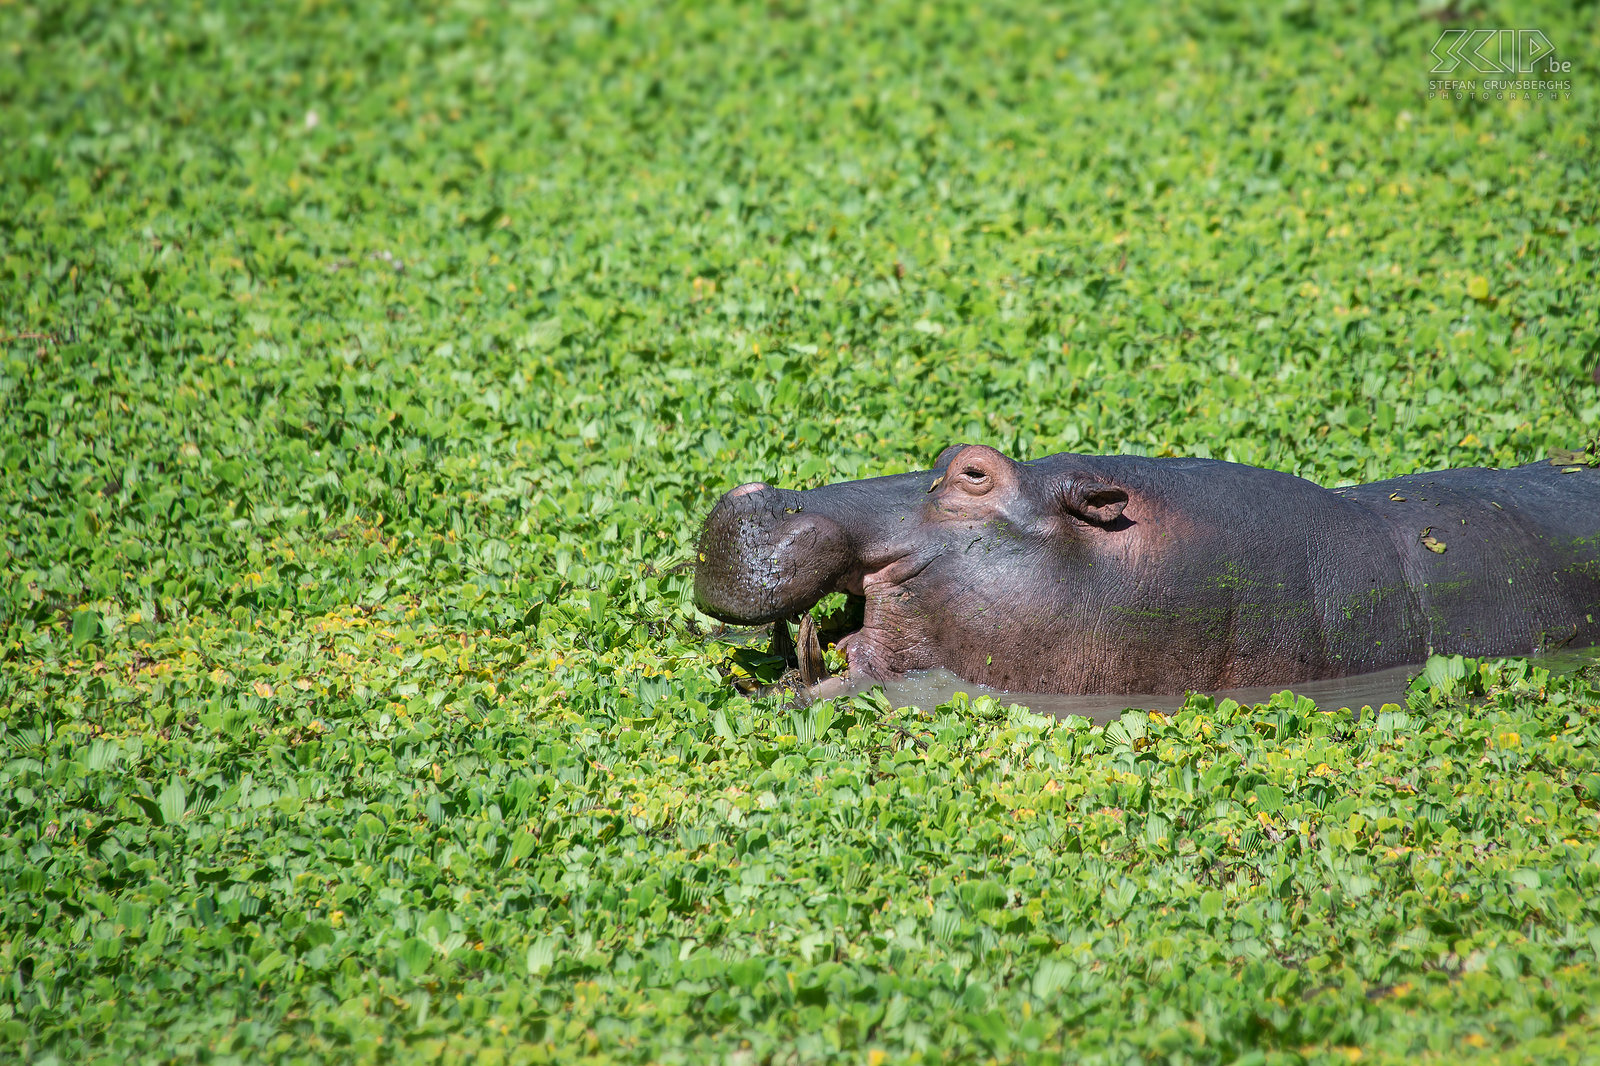 South Luangwa - Hippo in nile cabbage A hippo munching serenely on Nile cabbage at one of the pools in South Luangwa. There are fifty hippos  per kilometer in the Luangwa river. Stefan Cruysberghs